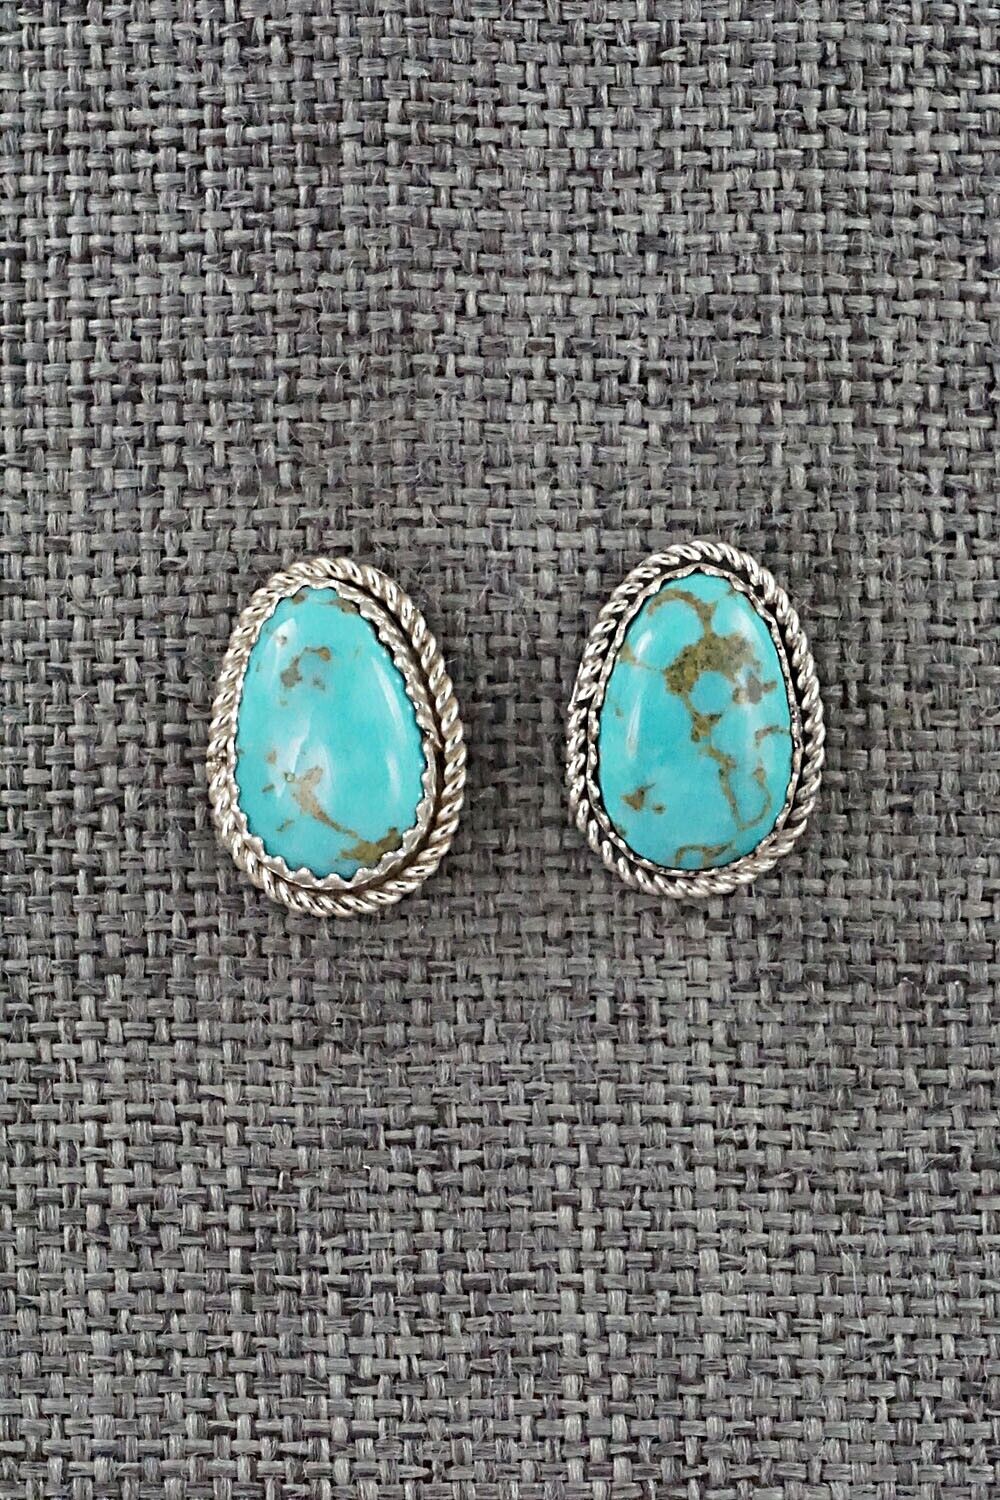 Turquoise & Sterling Silver Earrings - Sally Arviso